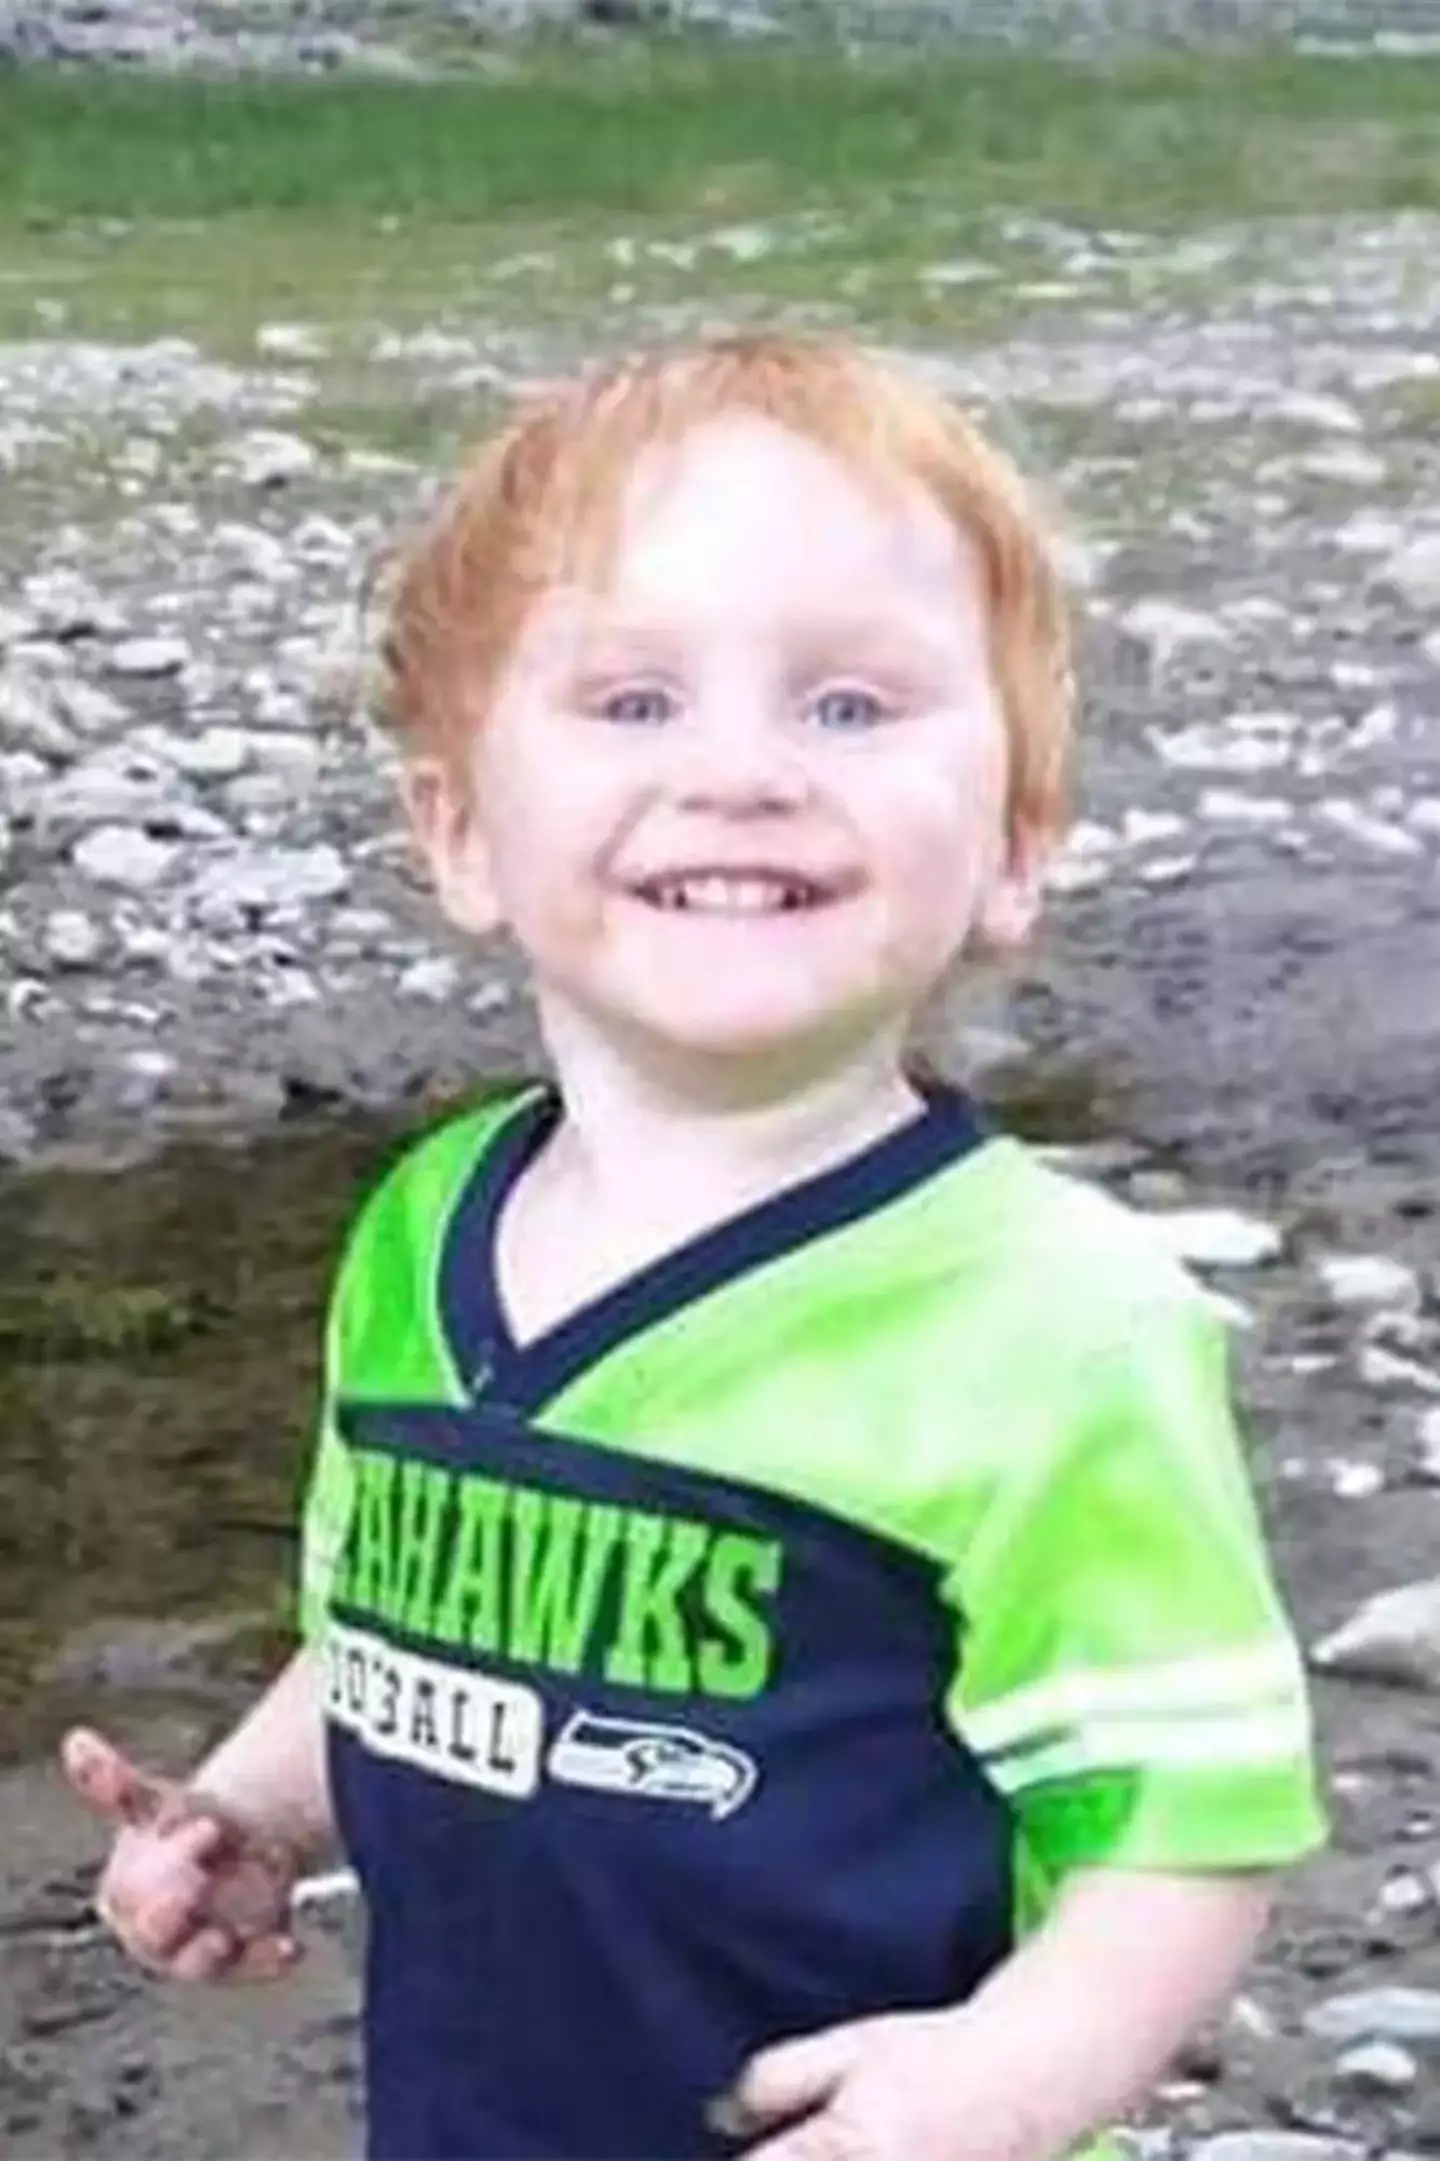 The boy was found alive and in 'good spirits'.